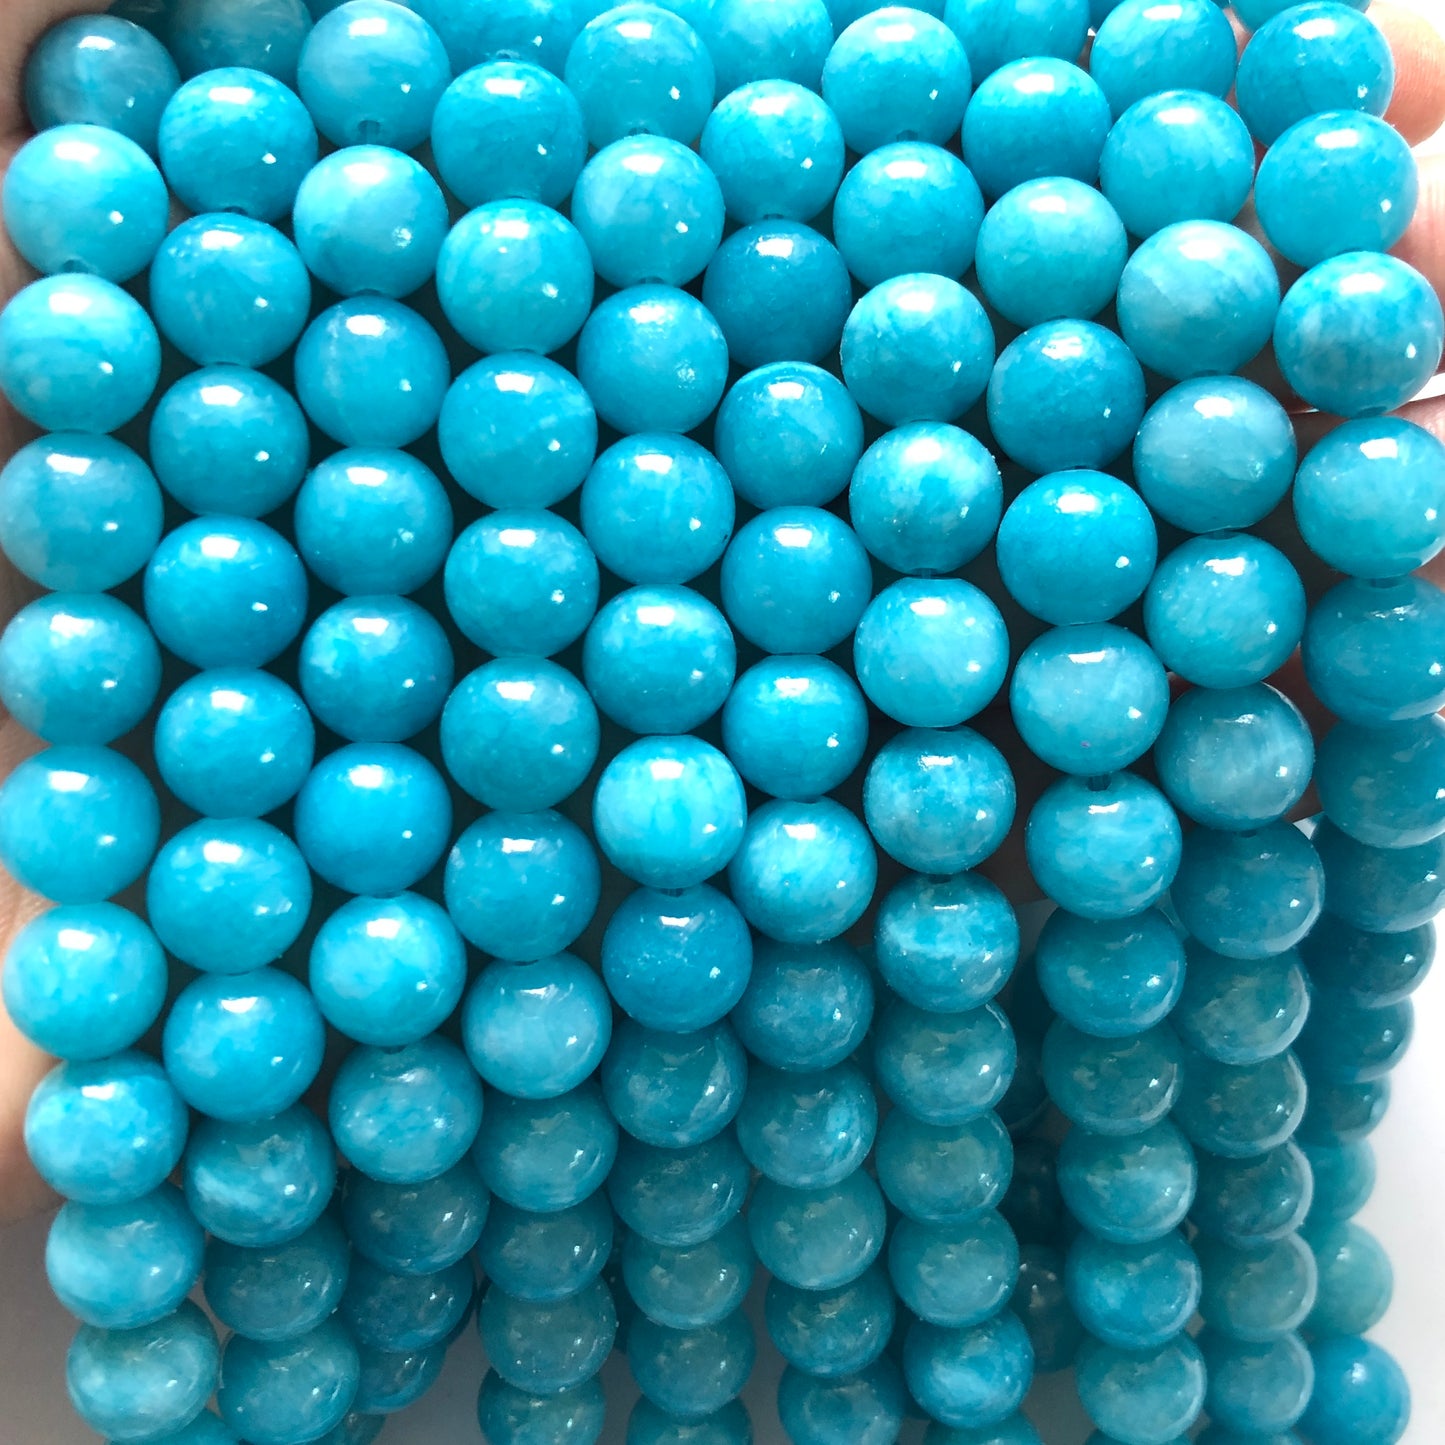 2 Strands/lot 10mm Light Blue Turquoise Jade Round Stone Beads Stone Beads New Beads Arrivals Round Jade Beads Charms Beads Beyond